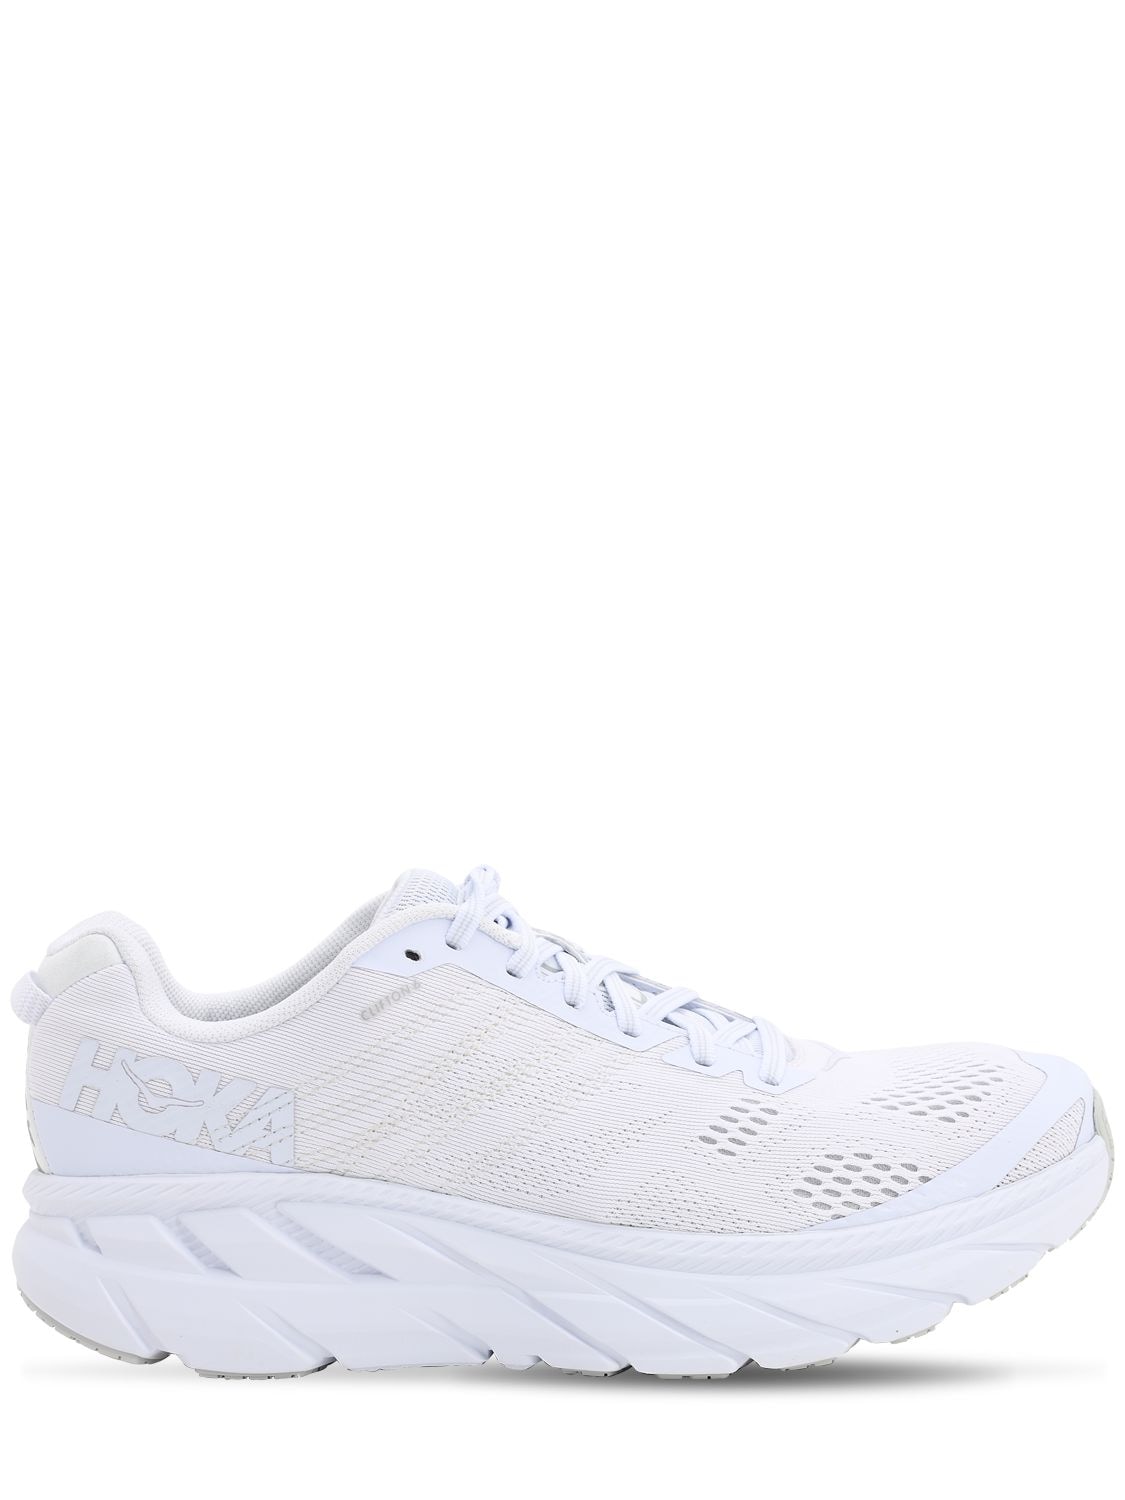 Hoka One One Clifton 6 Running Sneakers In White